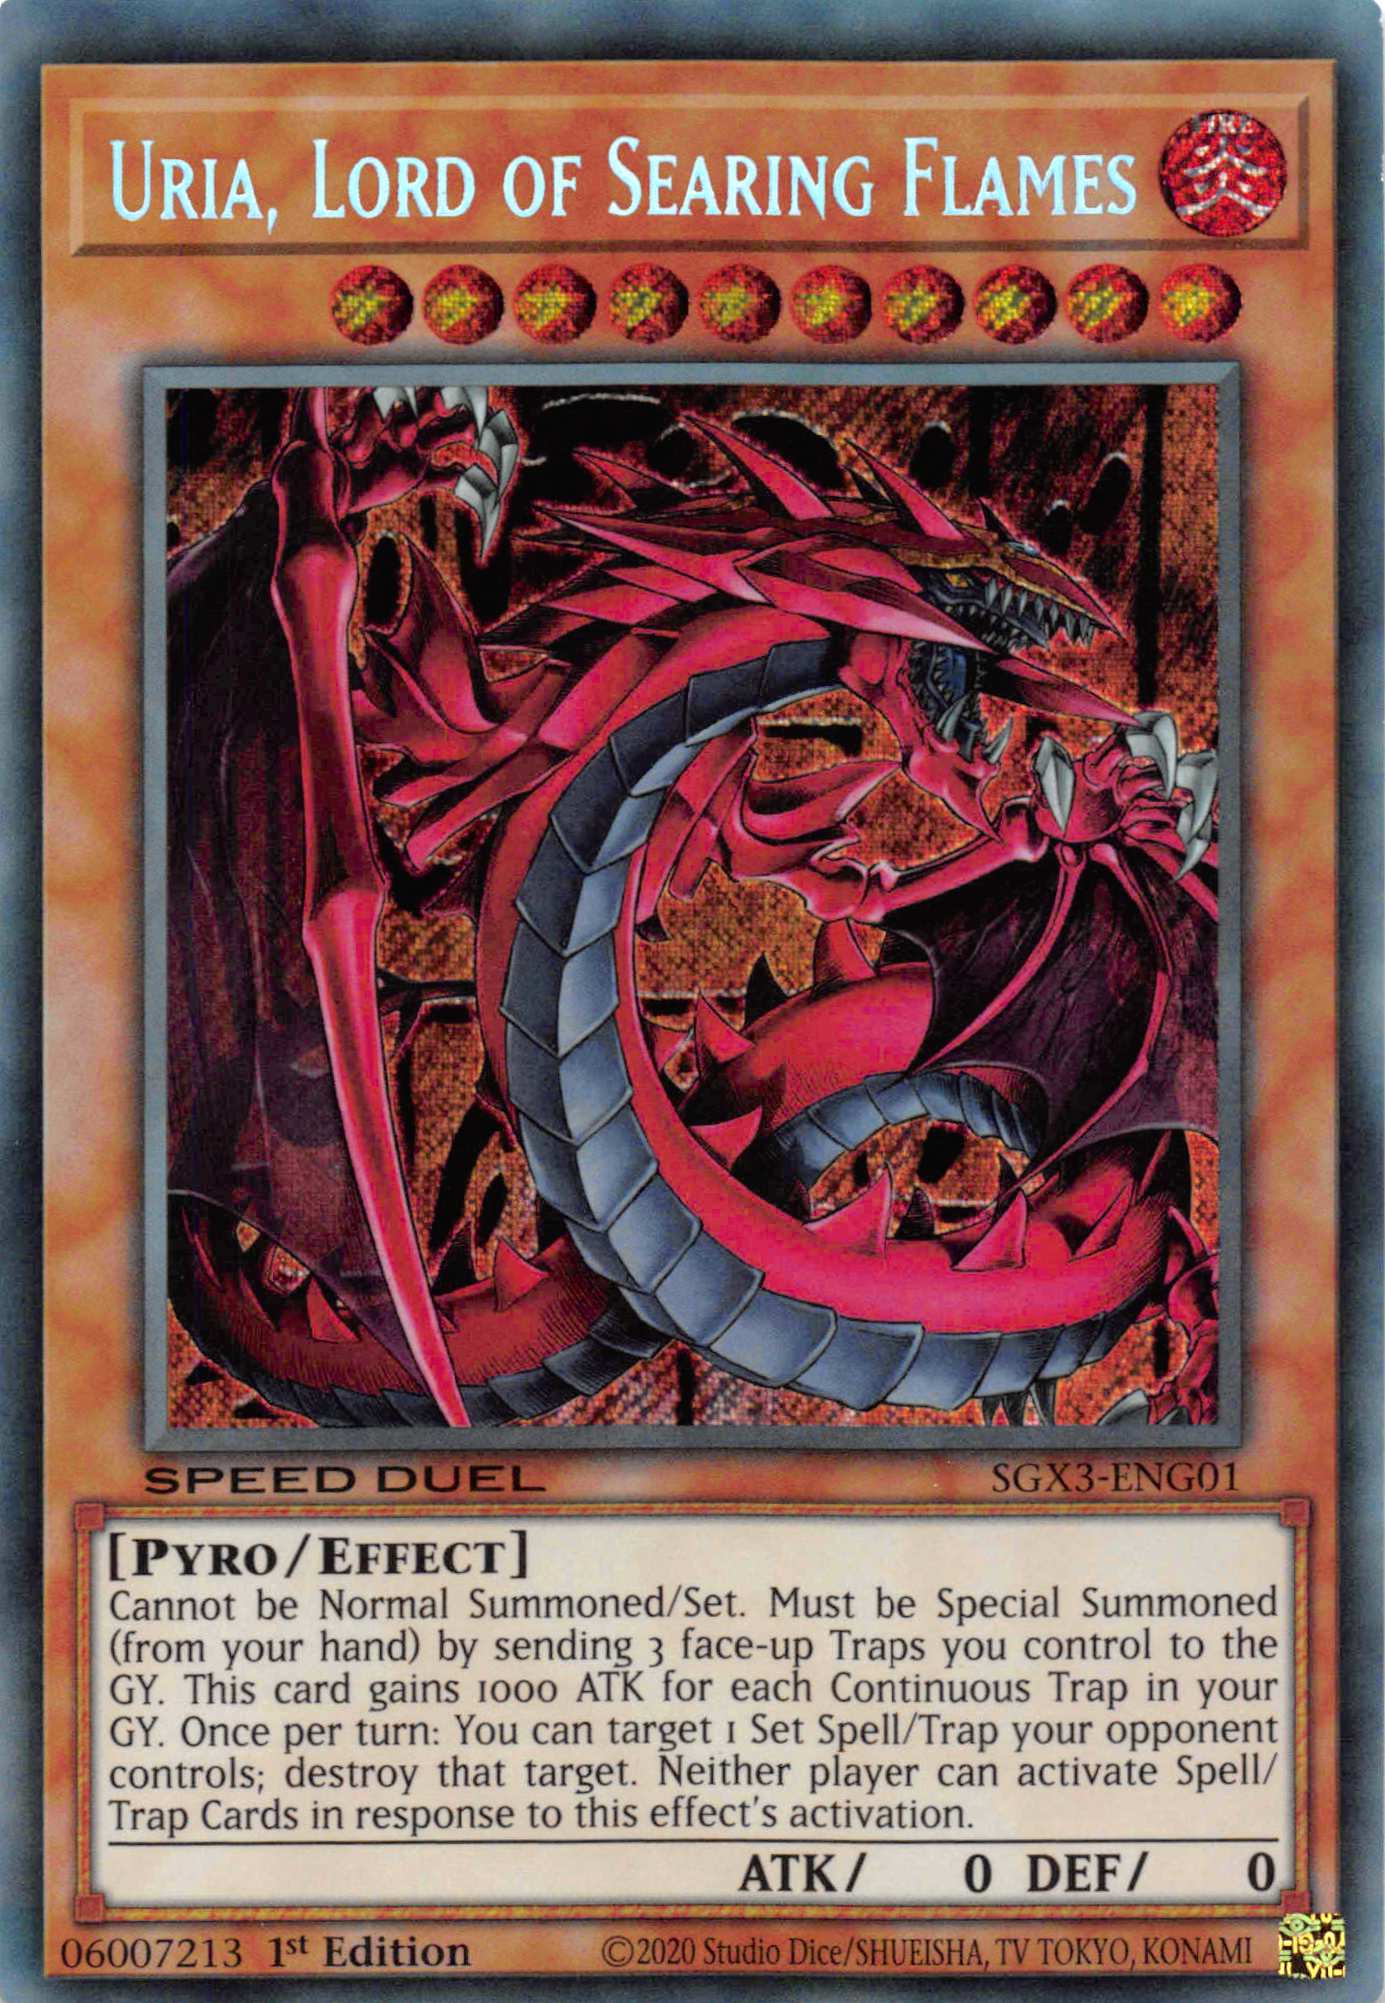 Uria, Lord of Searing Flames [SGX3-ENG01] Secret Rare